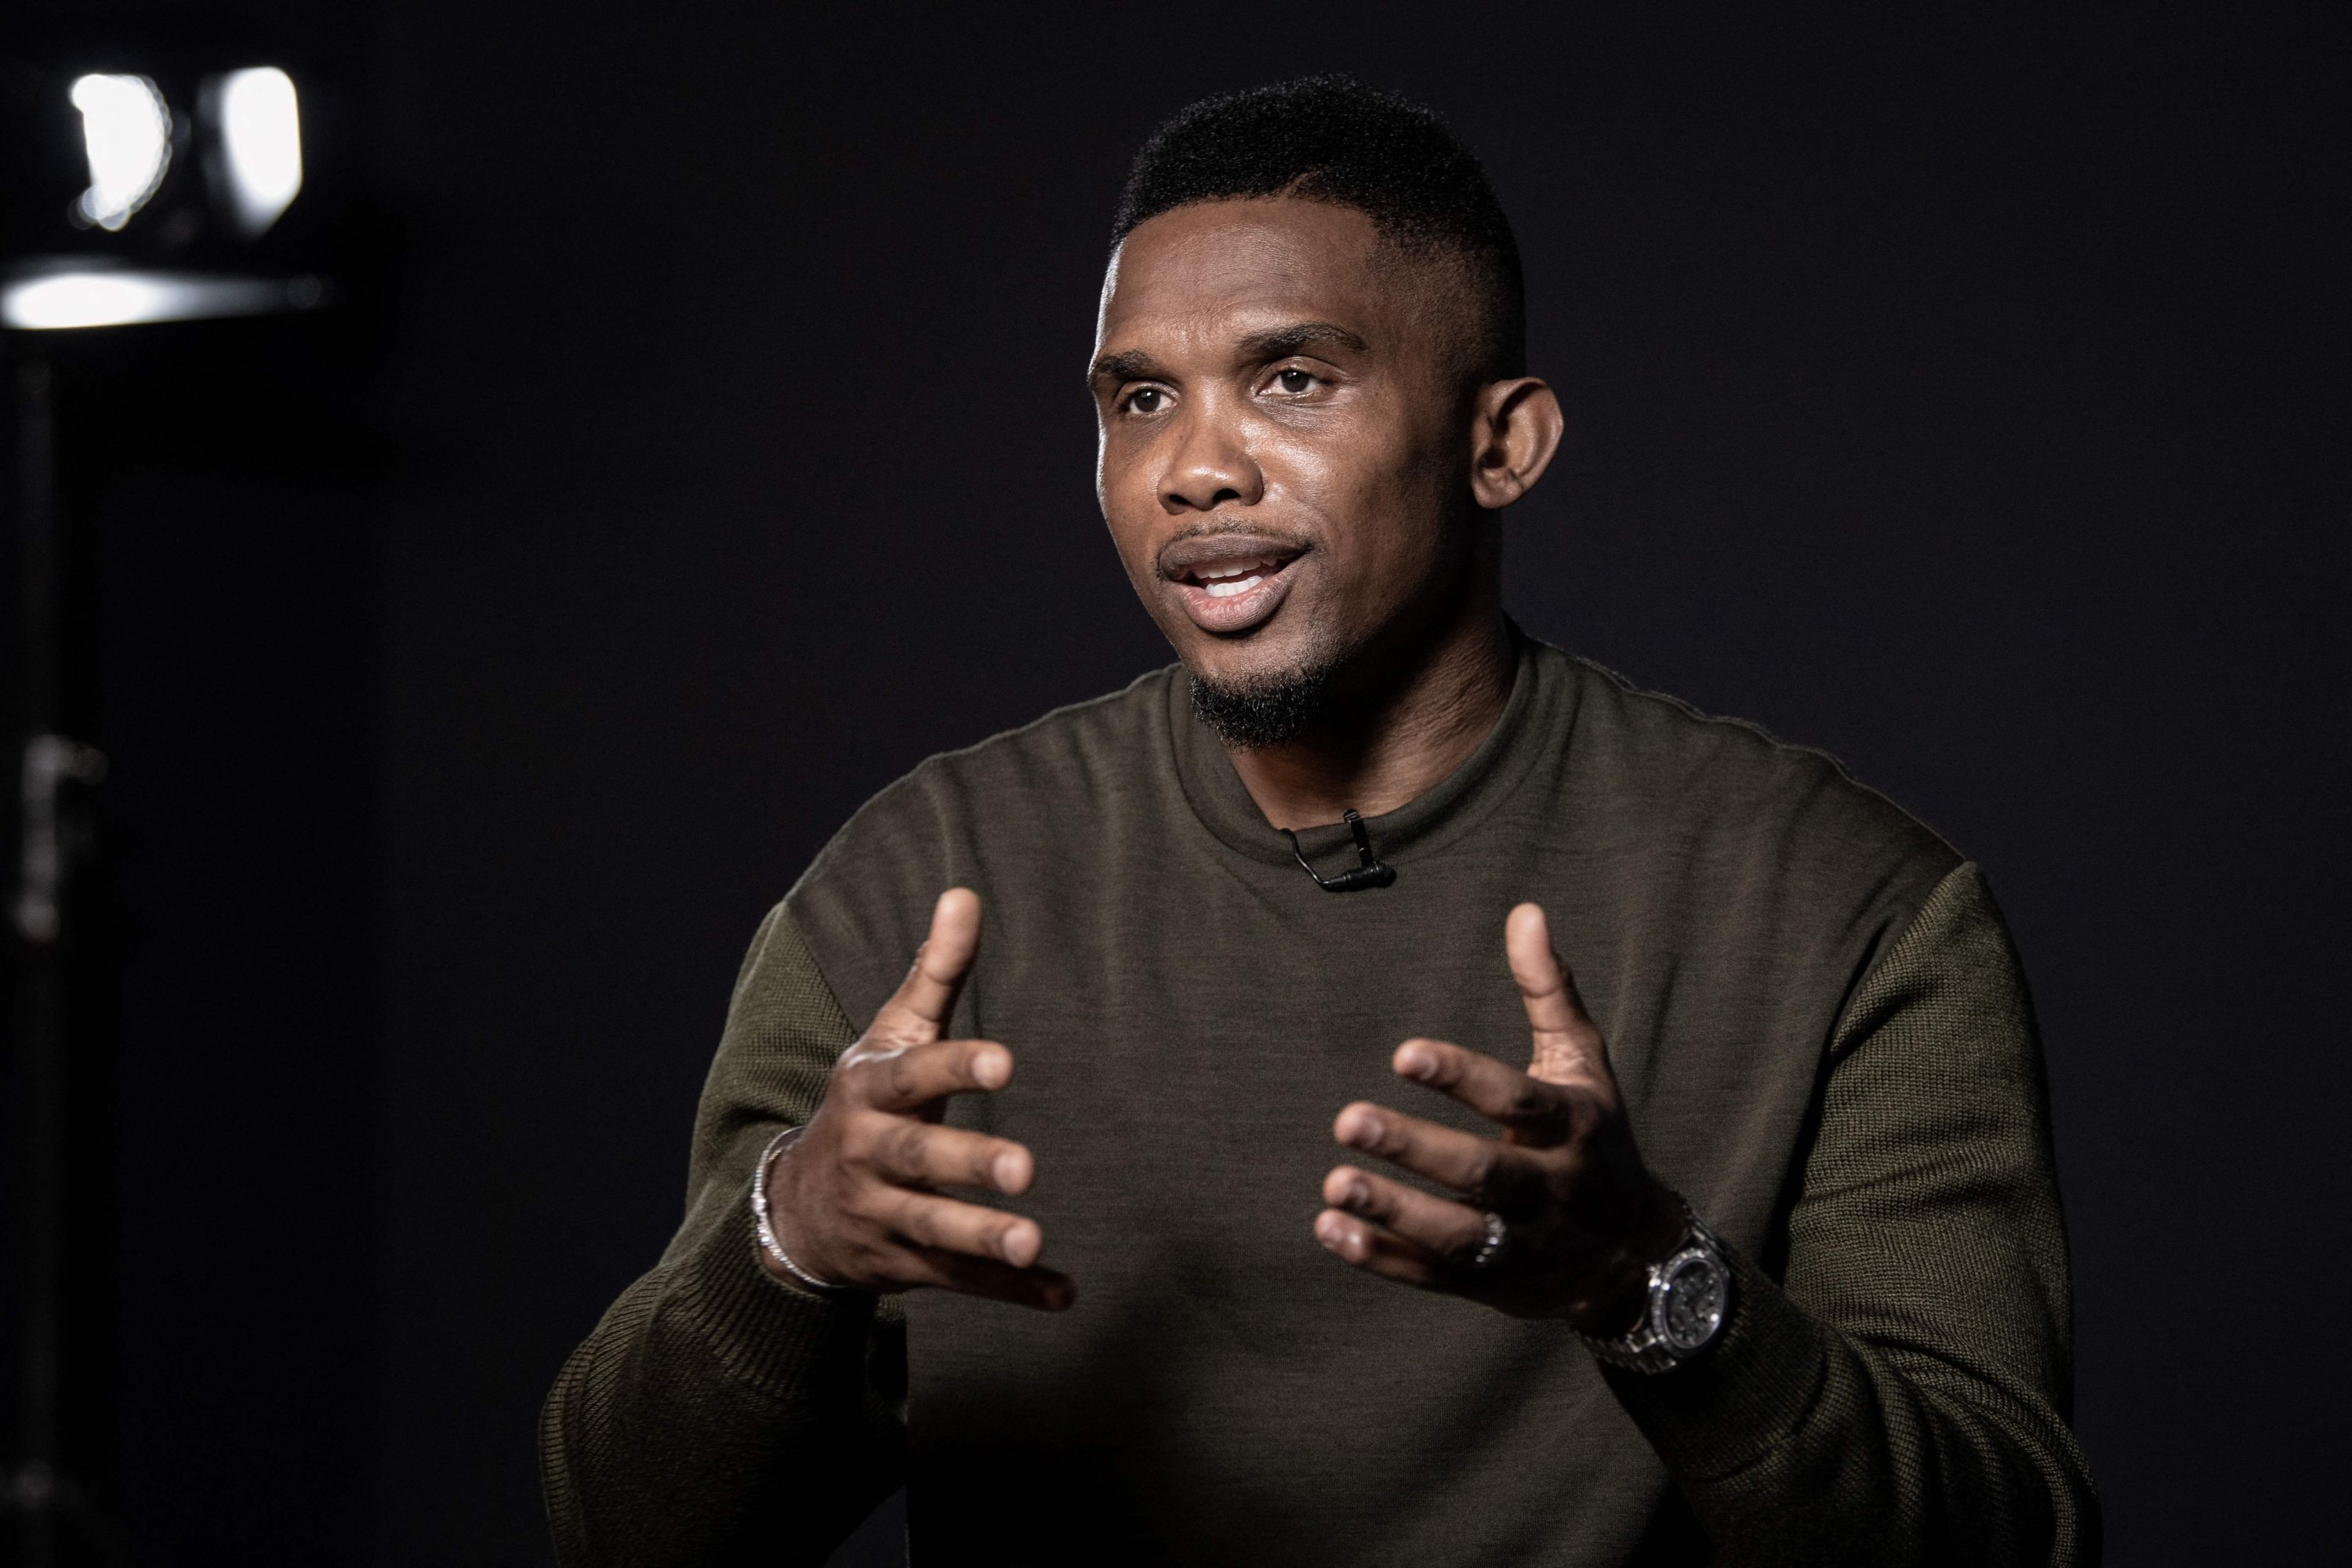 Samuel Eto'o to face 22-month prison sentence for tax fraud while in Barcelona between 2006 and 2009